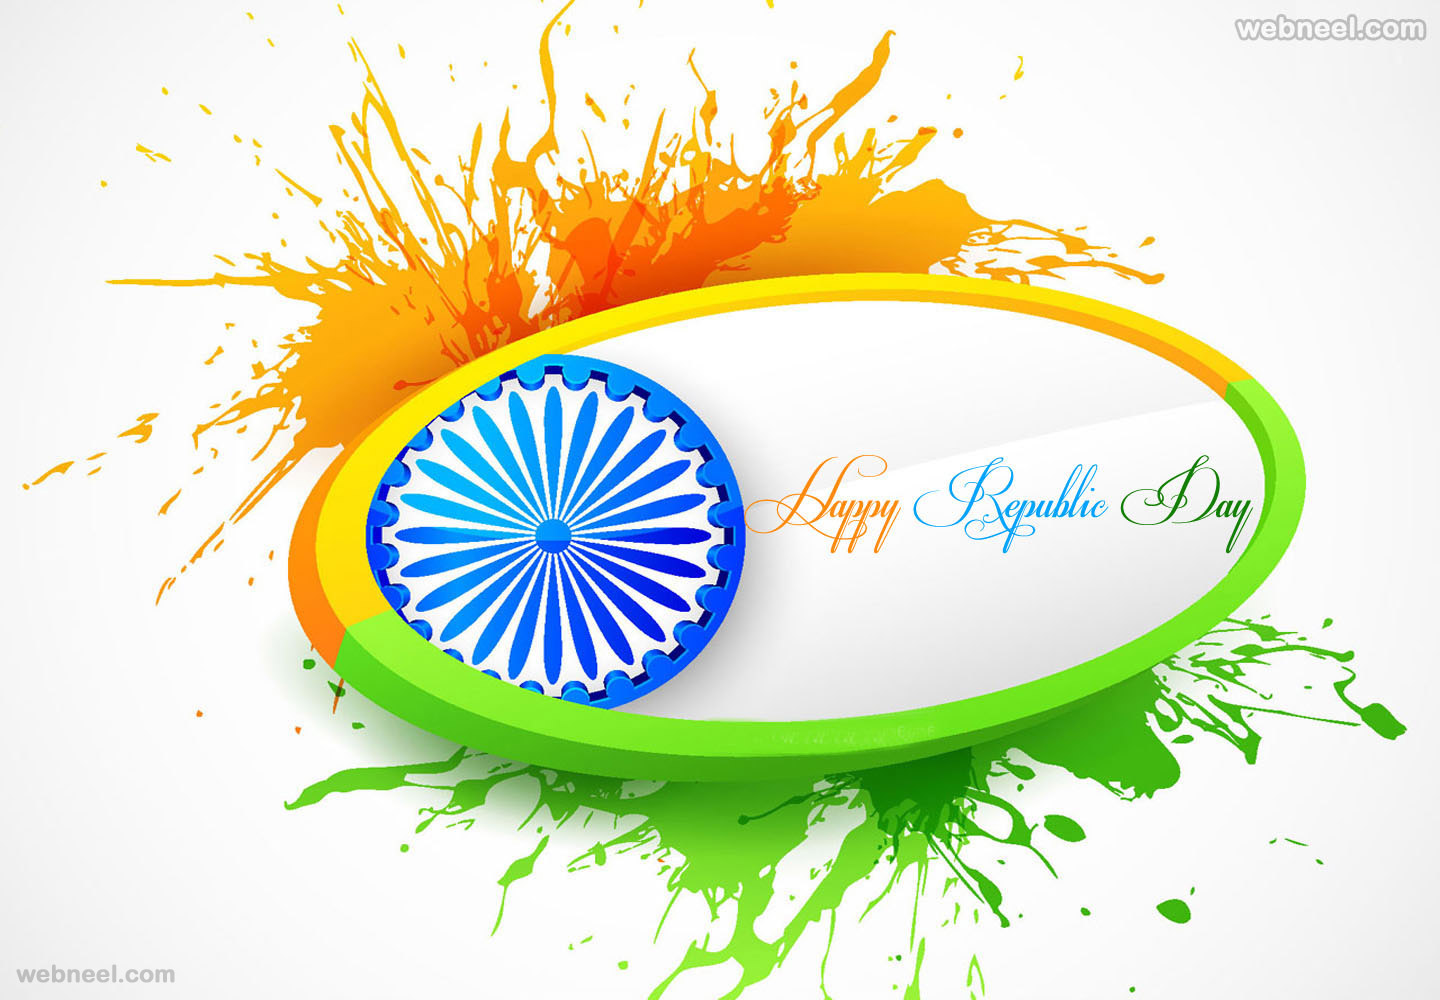 25 Beautiful Happy Republic Day Wishes And Wallpapers .spacial background aasif editx 26 january background 2020 republic day new background 2020 republic day 2020 editing background 26 editing 2020 republic day 2020 photo editing in picsart mayank editz snapseed amazing 26 january photo editing 2020 best republic day photo. happy republic day wishes and wallpapers